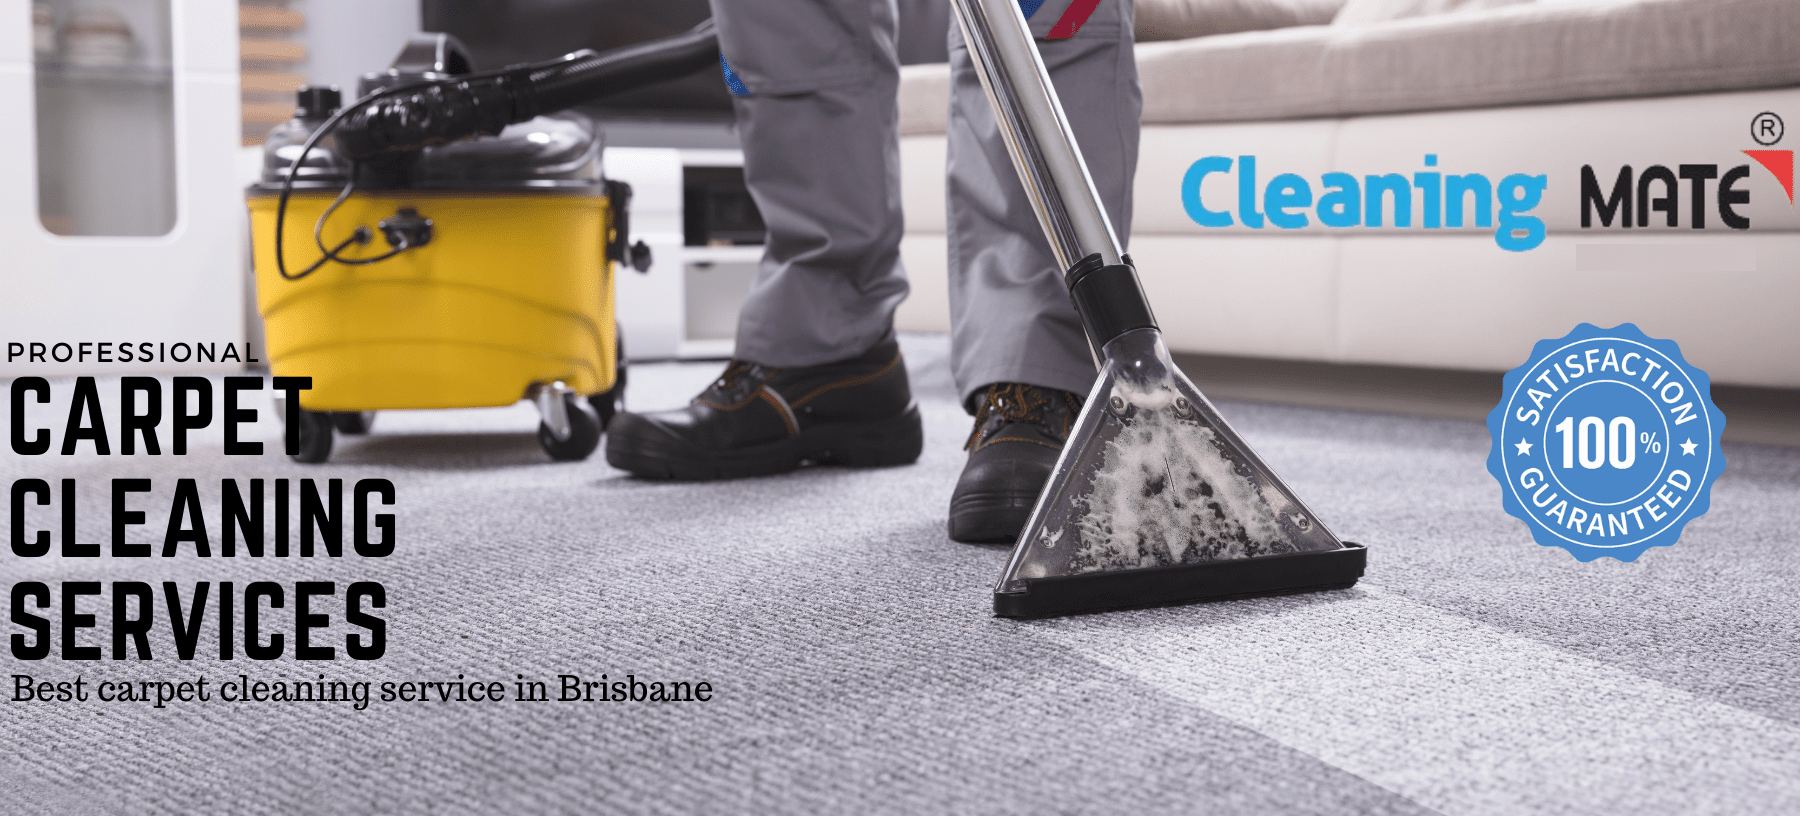 Cleaning Mate Carpet Cleaning Brisbane - Sunnybank, AU, upholstery cleaning